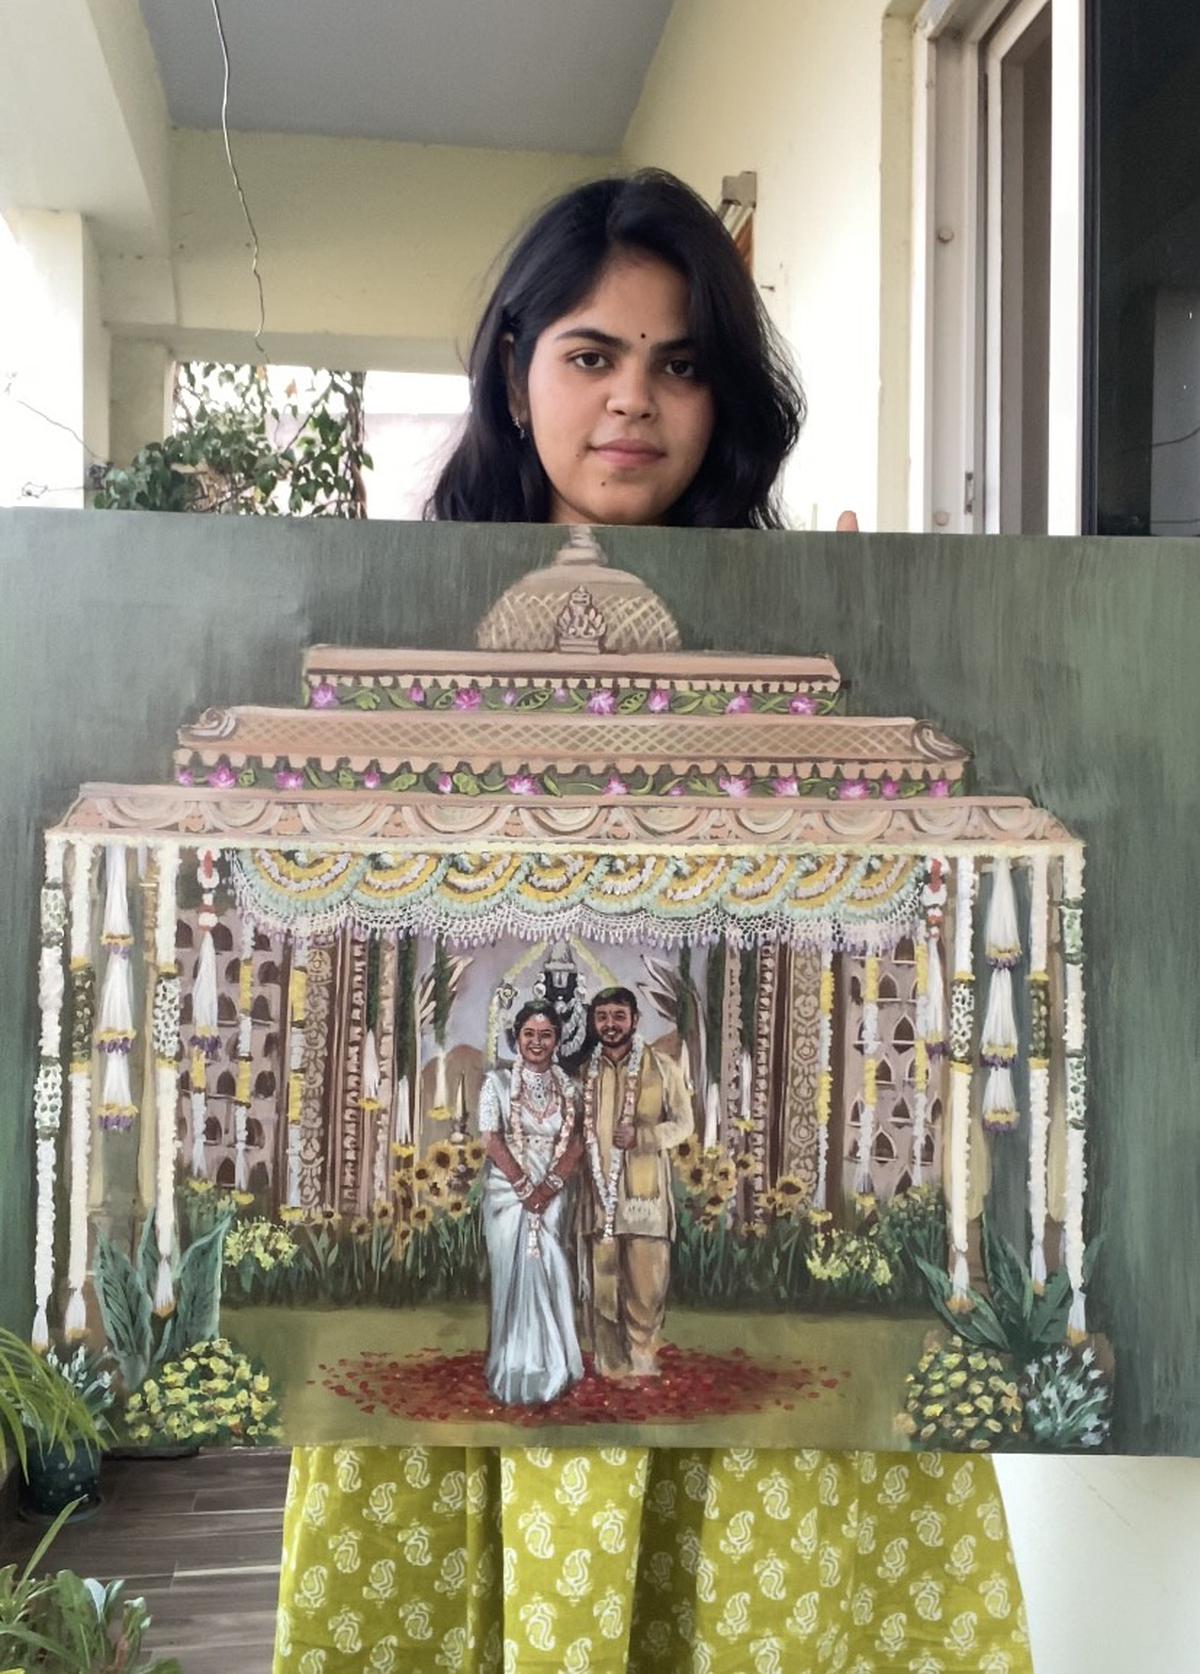 Dhanushya Pallam shows a painting done by her